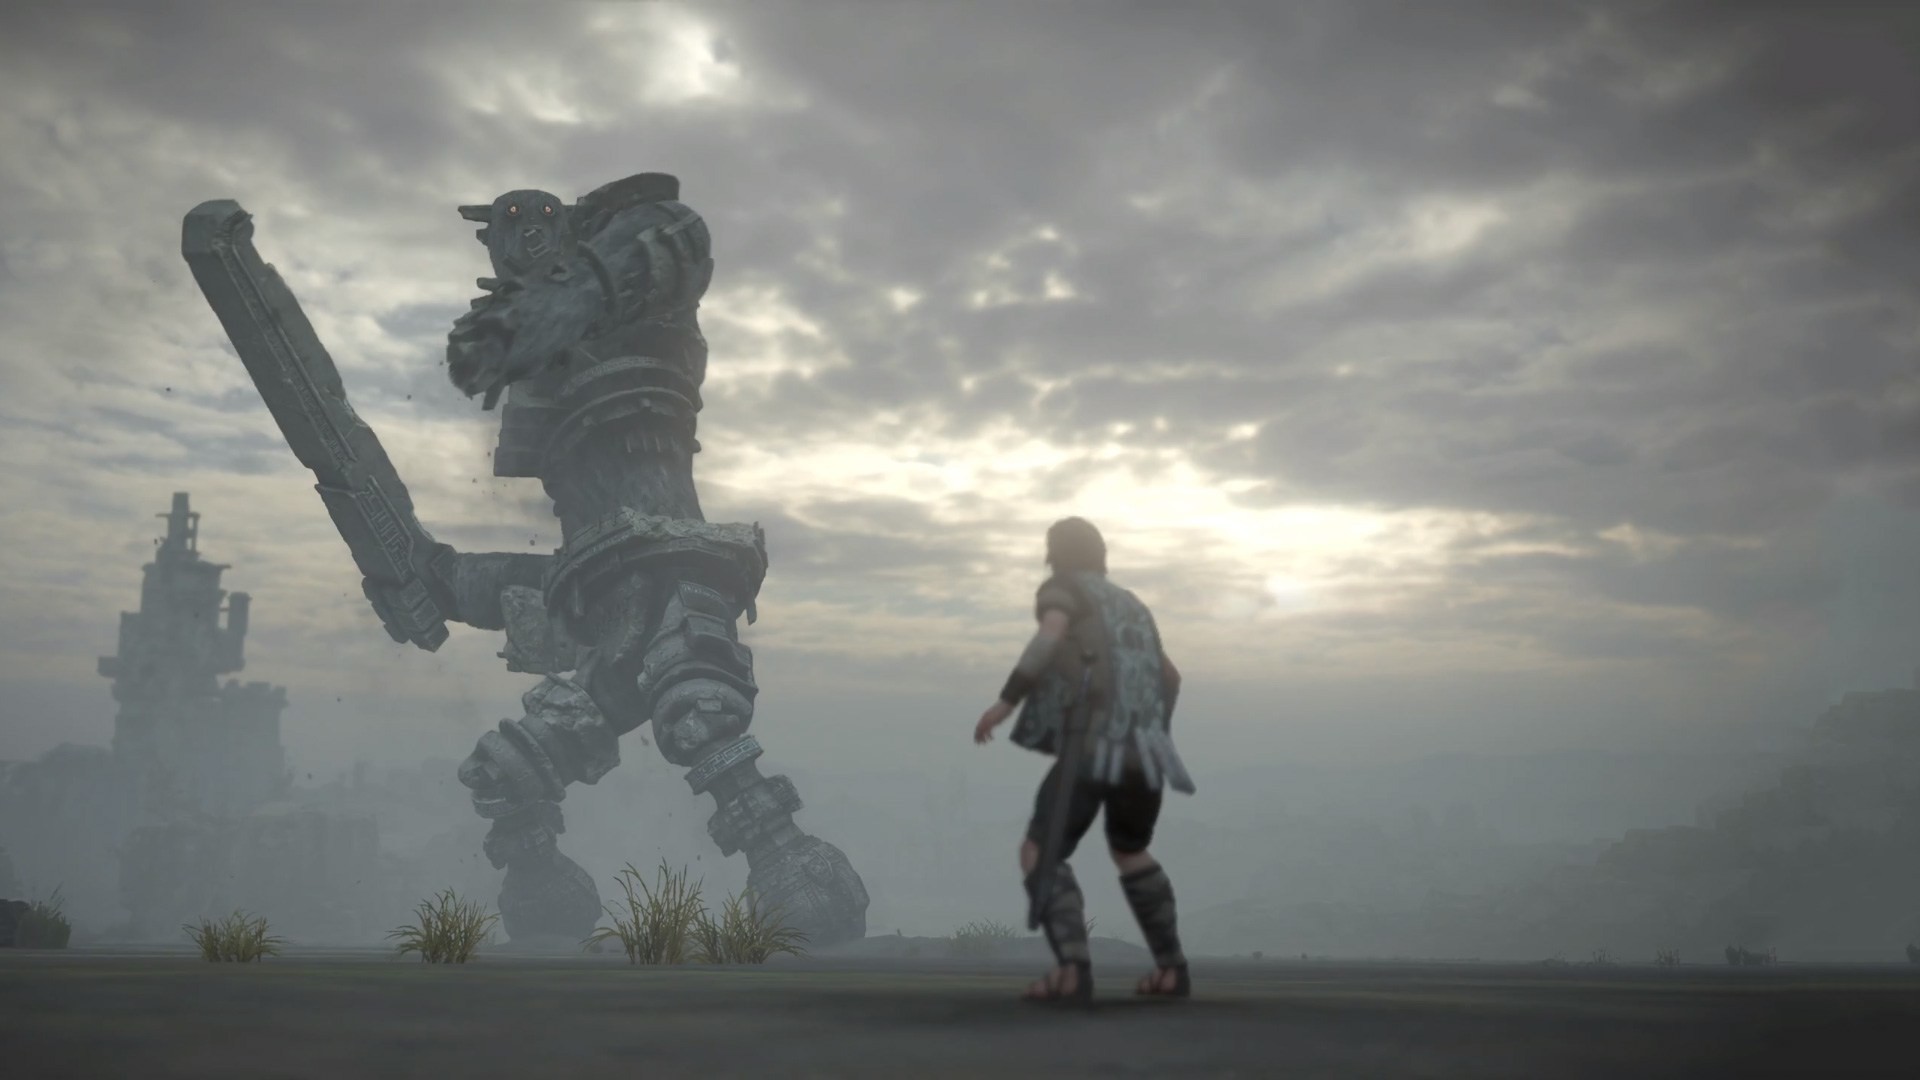 1920x1080 The classic Shadow of the Colossus is getting a remake on PS4. If you've  yet to play this cult classic game, make sure you pick it up when it  releases in ...